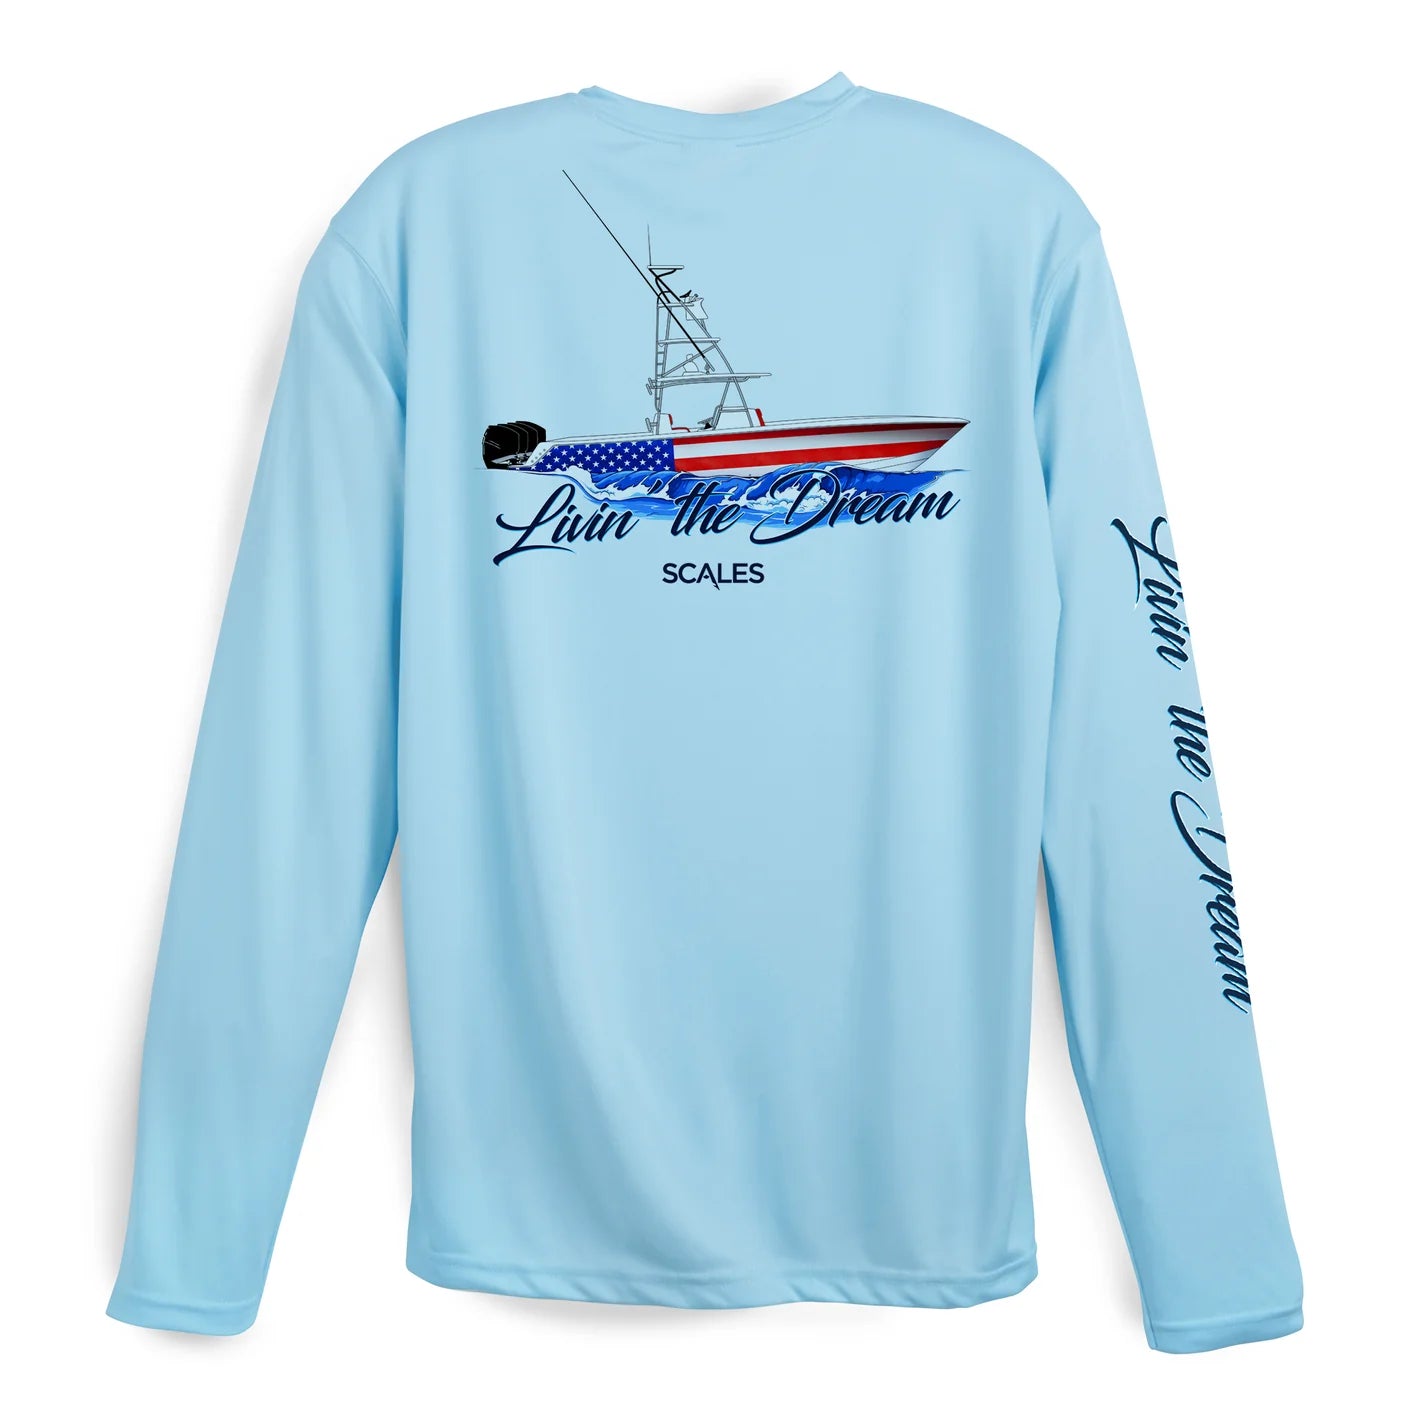 Scales Living The Dream L/S Performance - Light Blue - Compleat